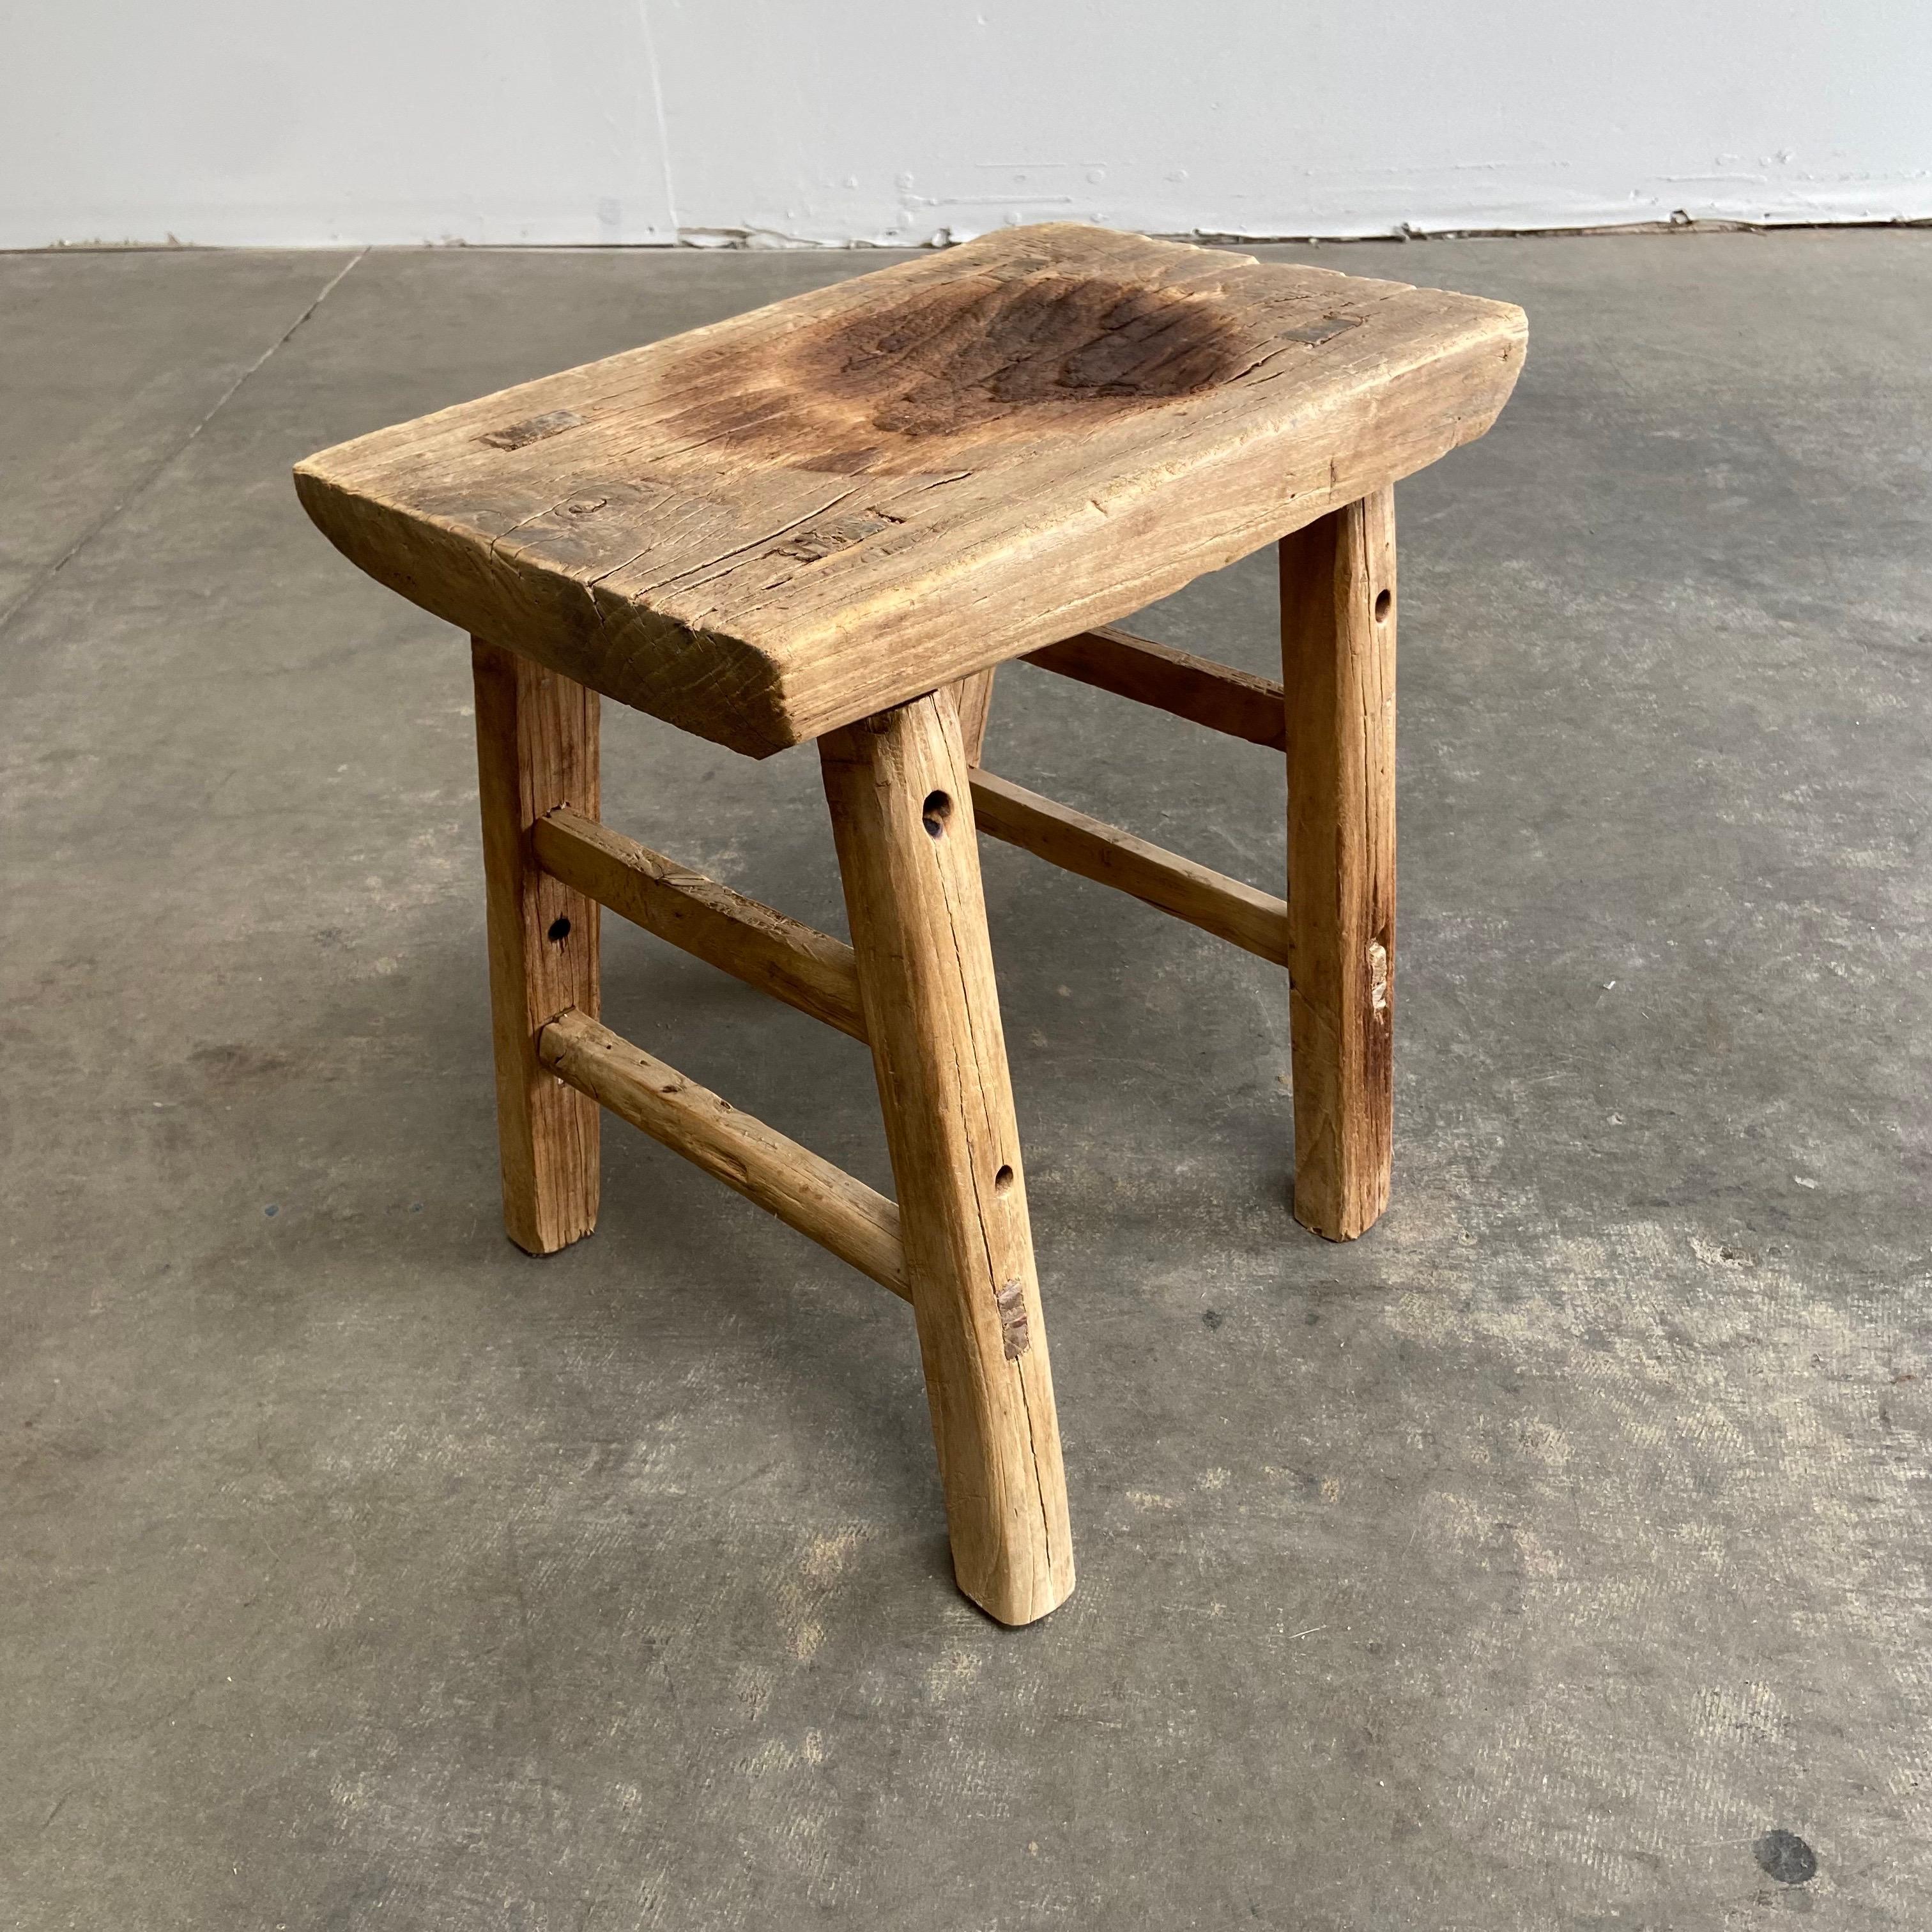 Elm stool 18-1/2”W x 15”D x 19-1/2”H
Seat: 11-1/2”D
Vintage antique elm wood stool These are the real vintage antique elm wood stools! Beautiful antique patina, with weathering and age, these are solid and sturdy ready for daily use, use as a